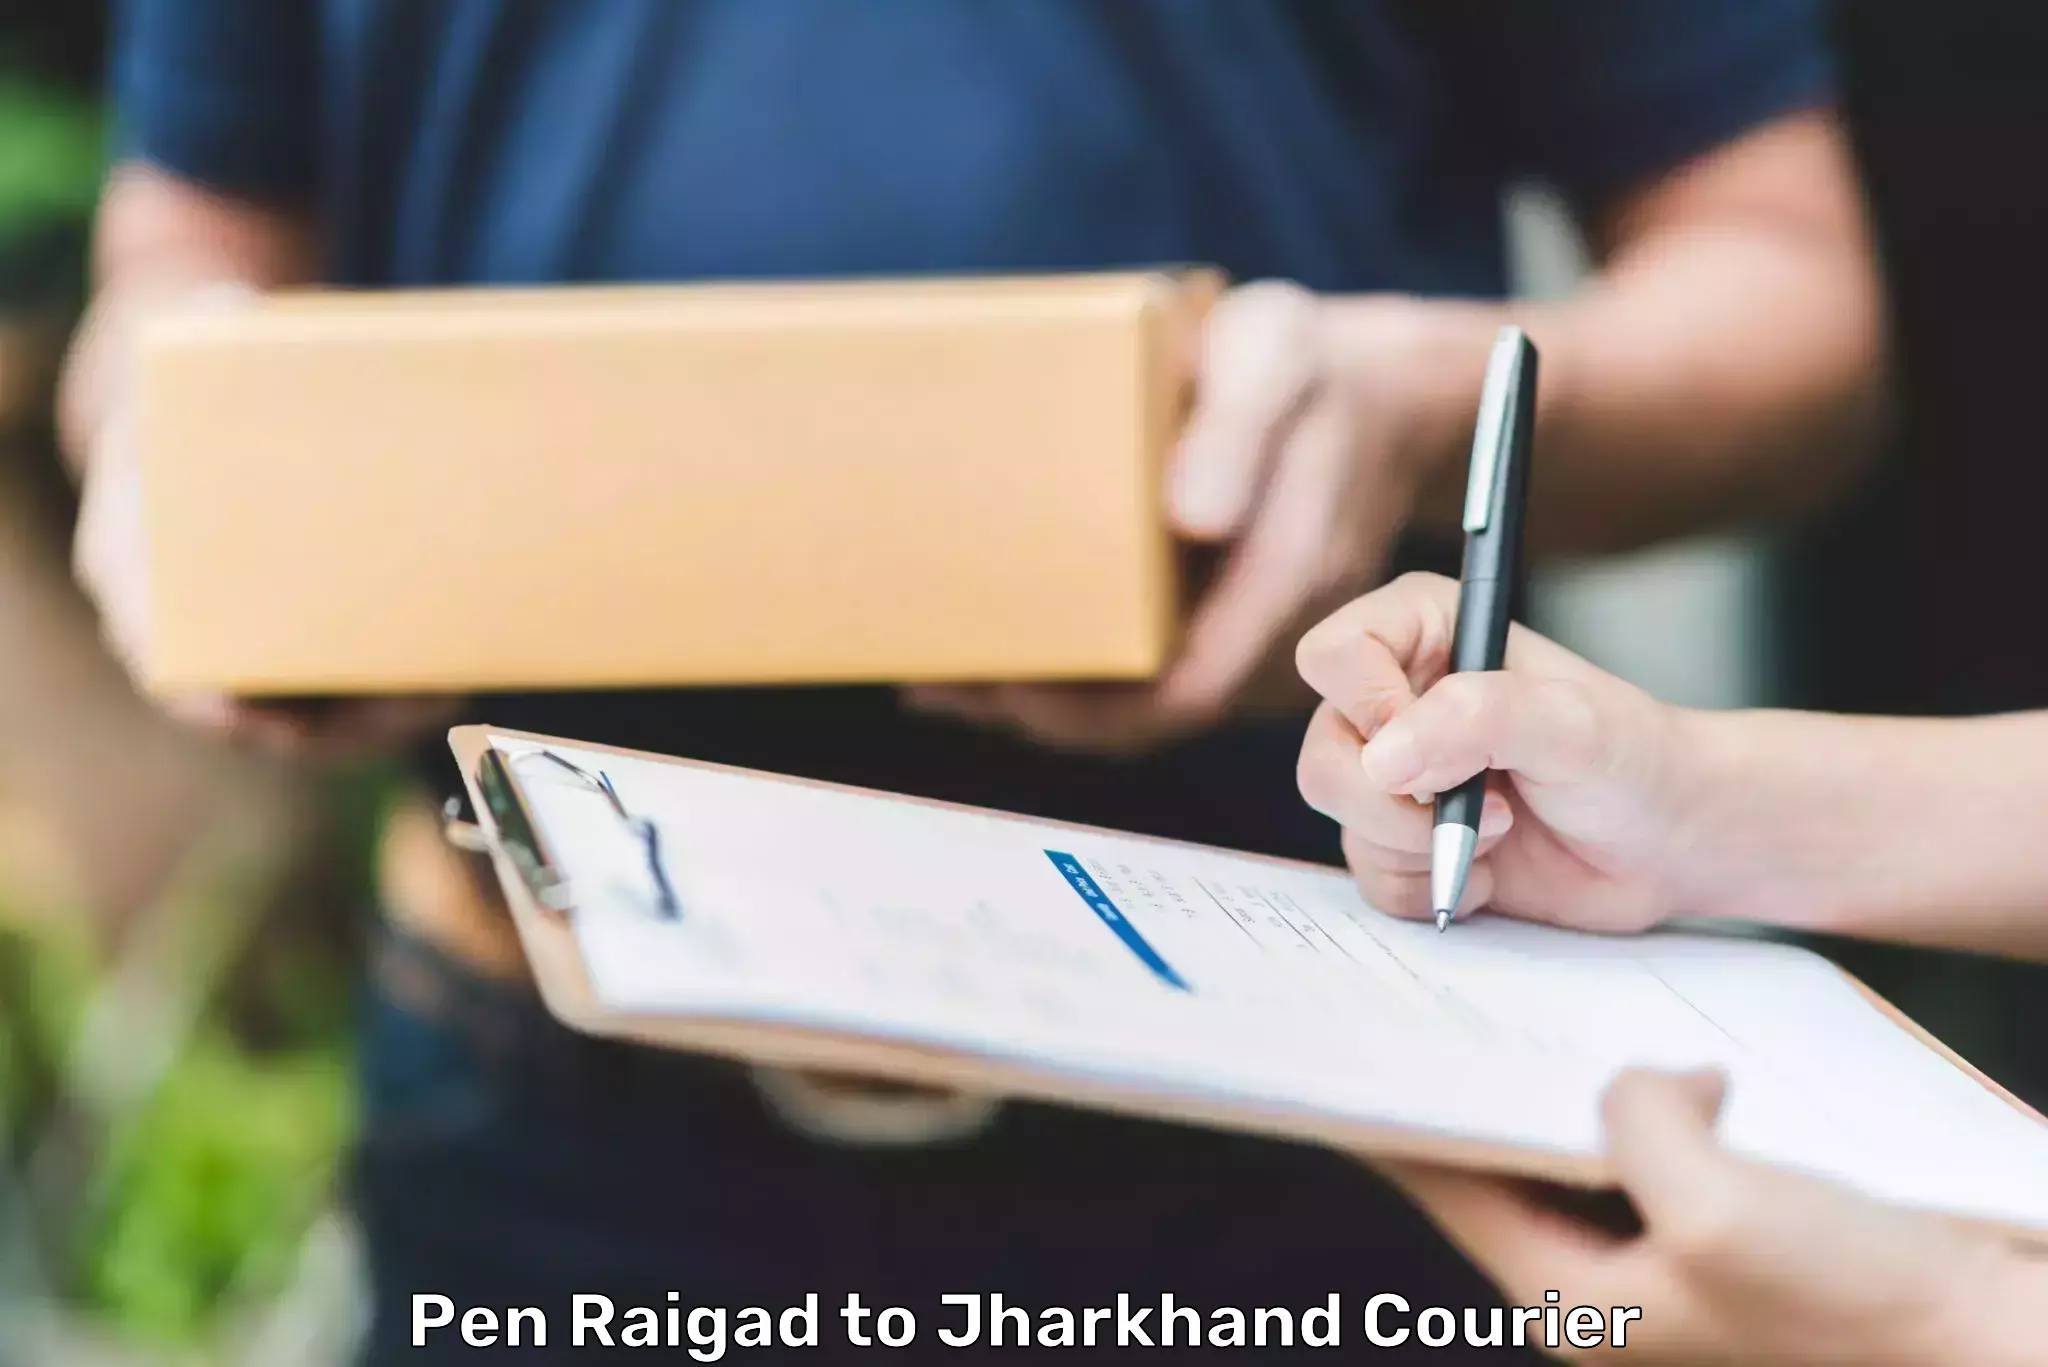 Quick courier services in Pen Raigad to Giridih